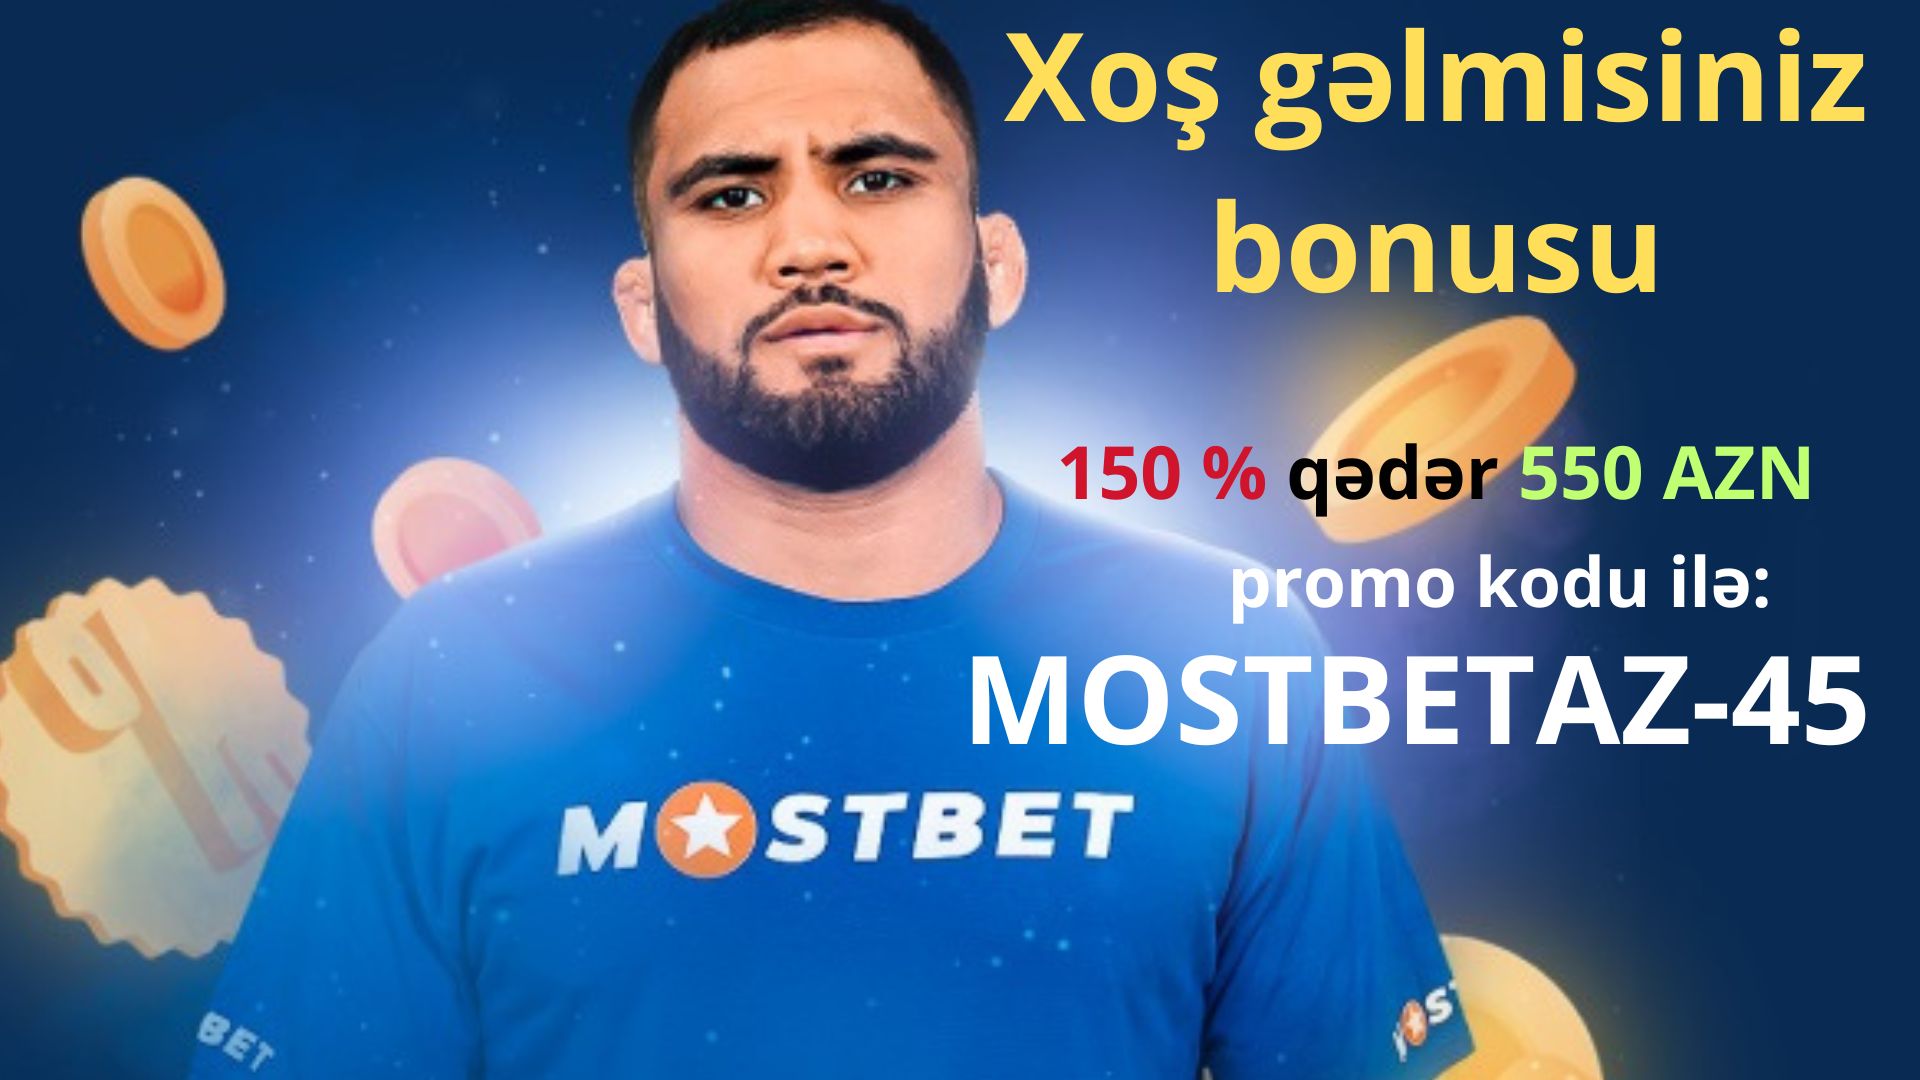 Have You Heard? Mostbet AZ 90 Bookmaker and Casino in Azerbaijan Is Your Best Bet To Grow